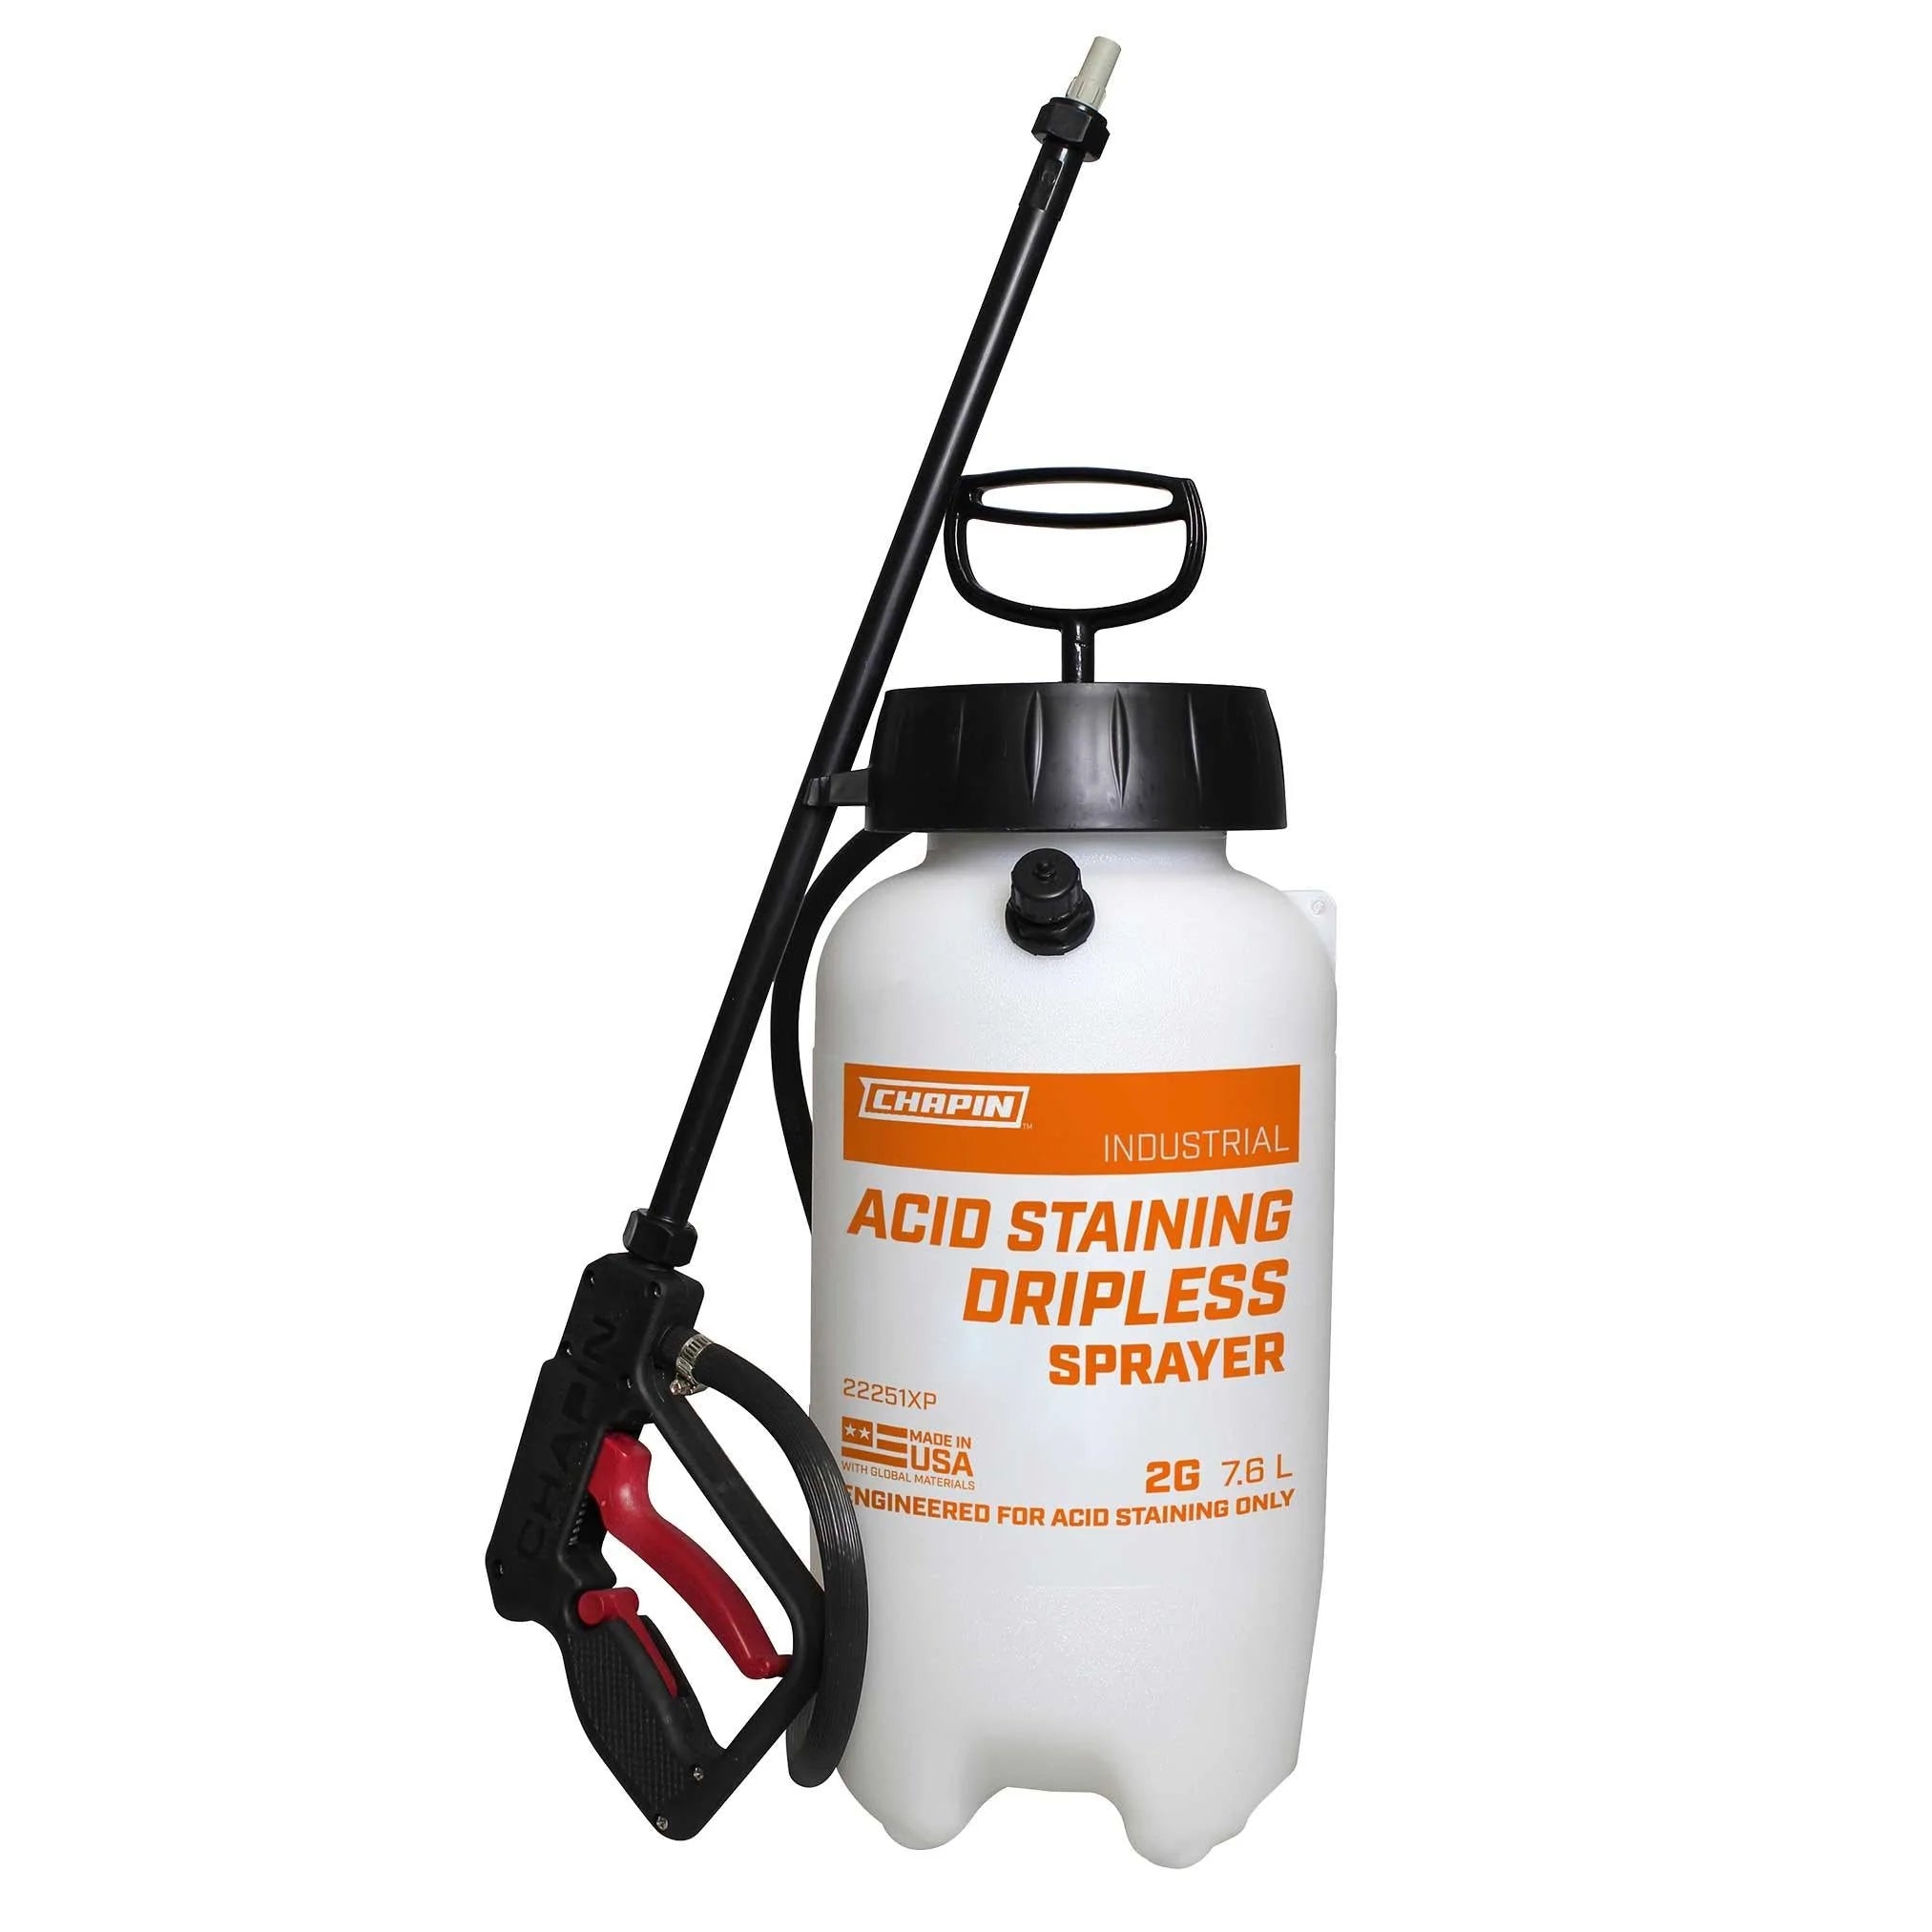 Black & Decker Sprayer from Chapin Manufacturing. 